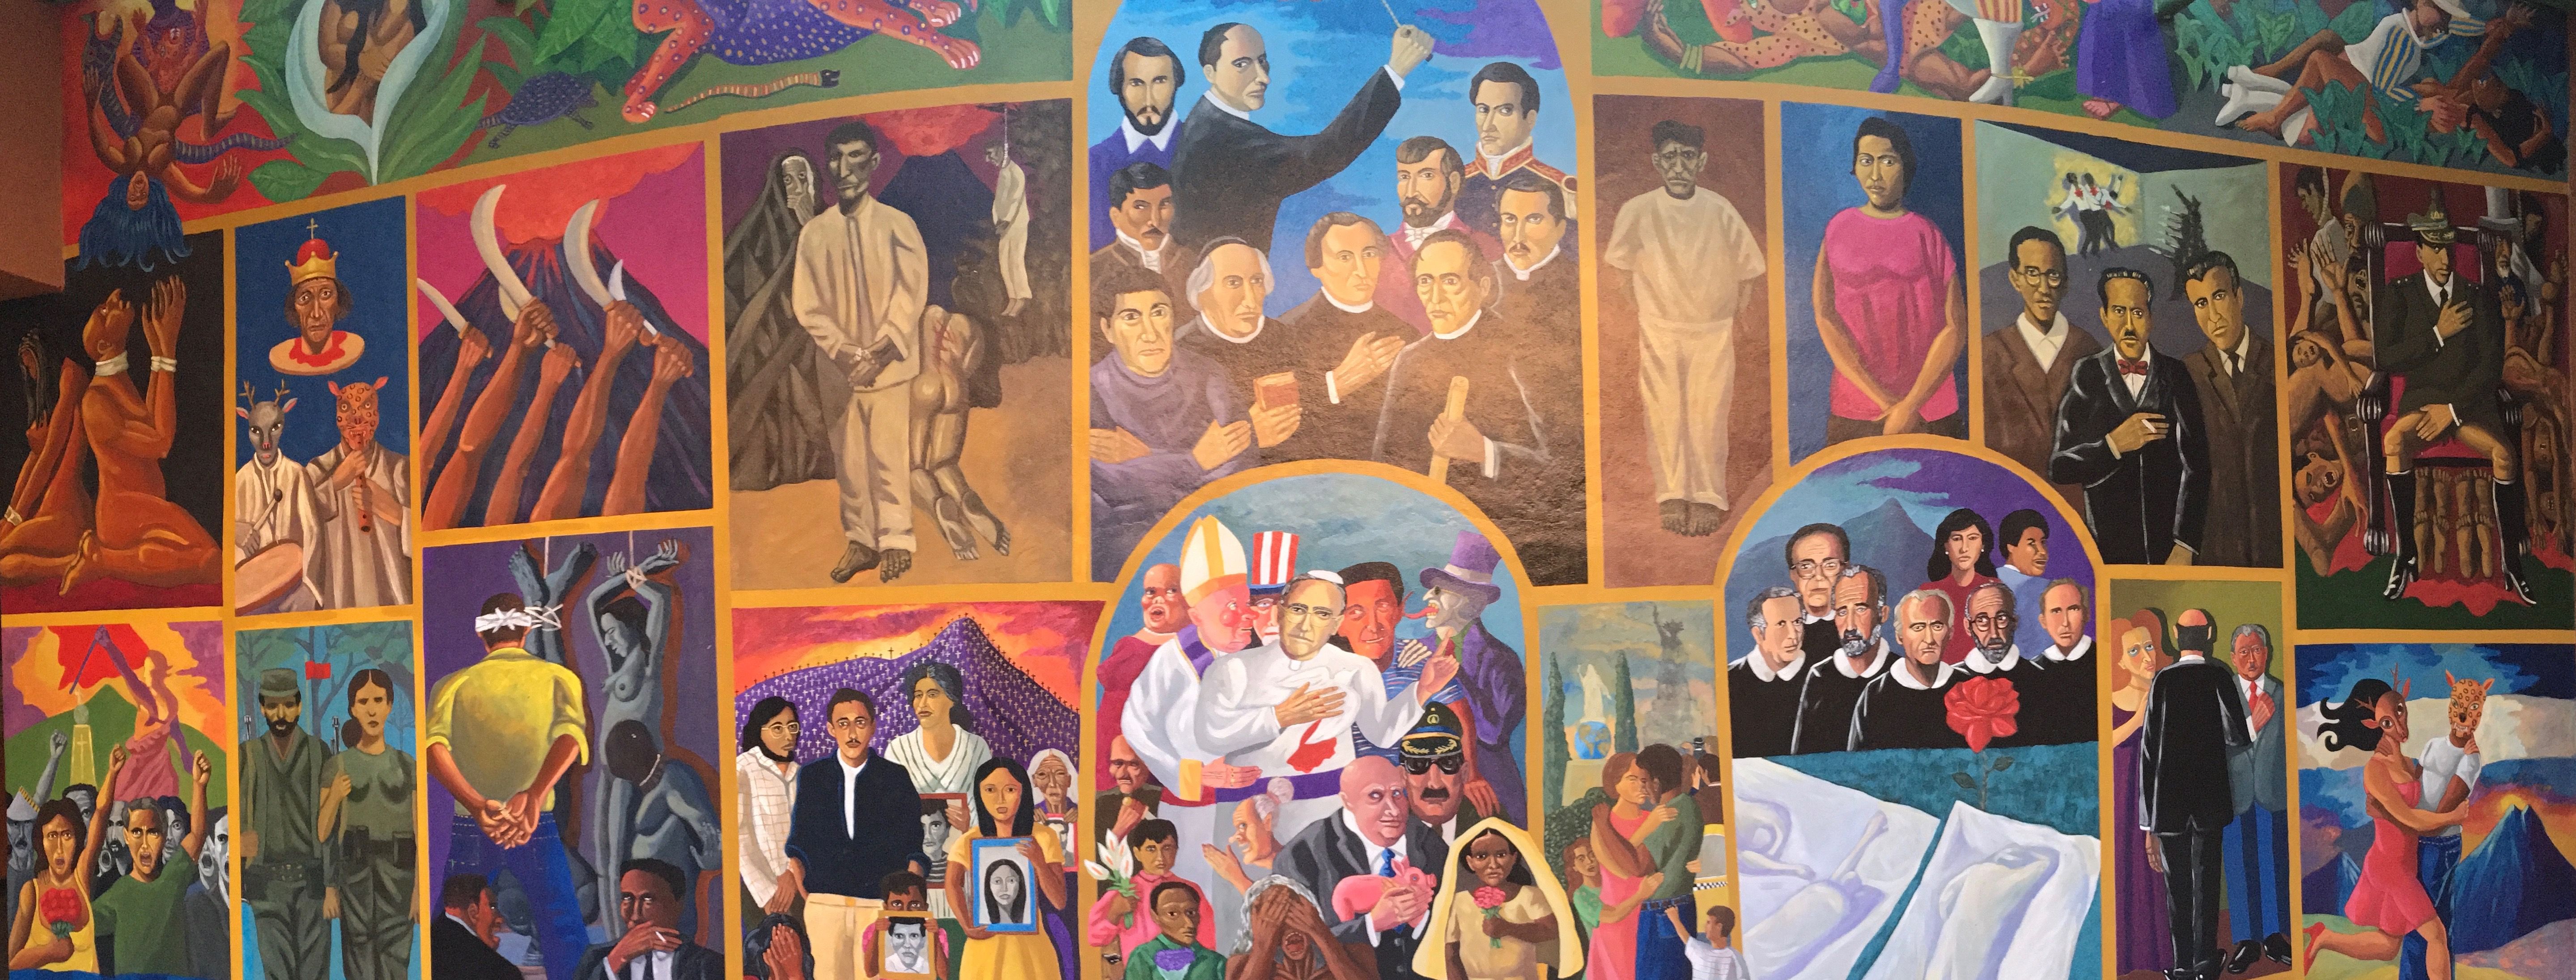 A powerful mural at the Museo Nacional de Antropología in San Salvador depicts the country's chaotic past—from colonial atrocities to the massacre of indigenous people in the 1940s and the brutal civil war of the 1980s. Image by Lauryn Claassen. El Salvador, 2017.